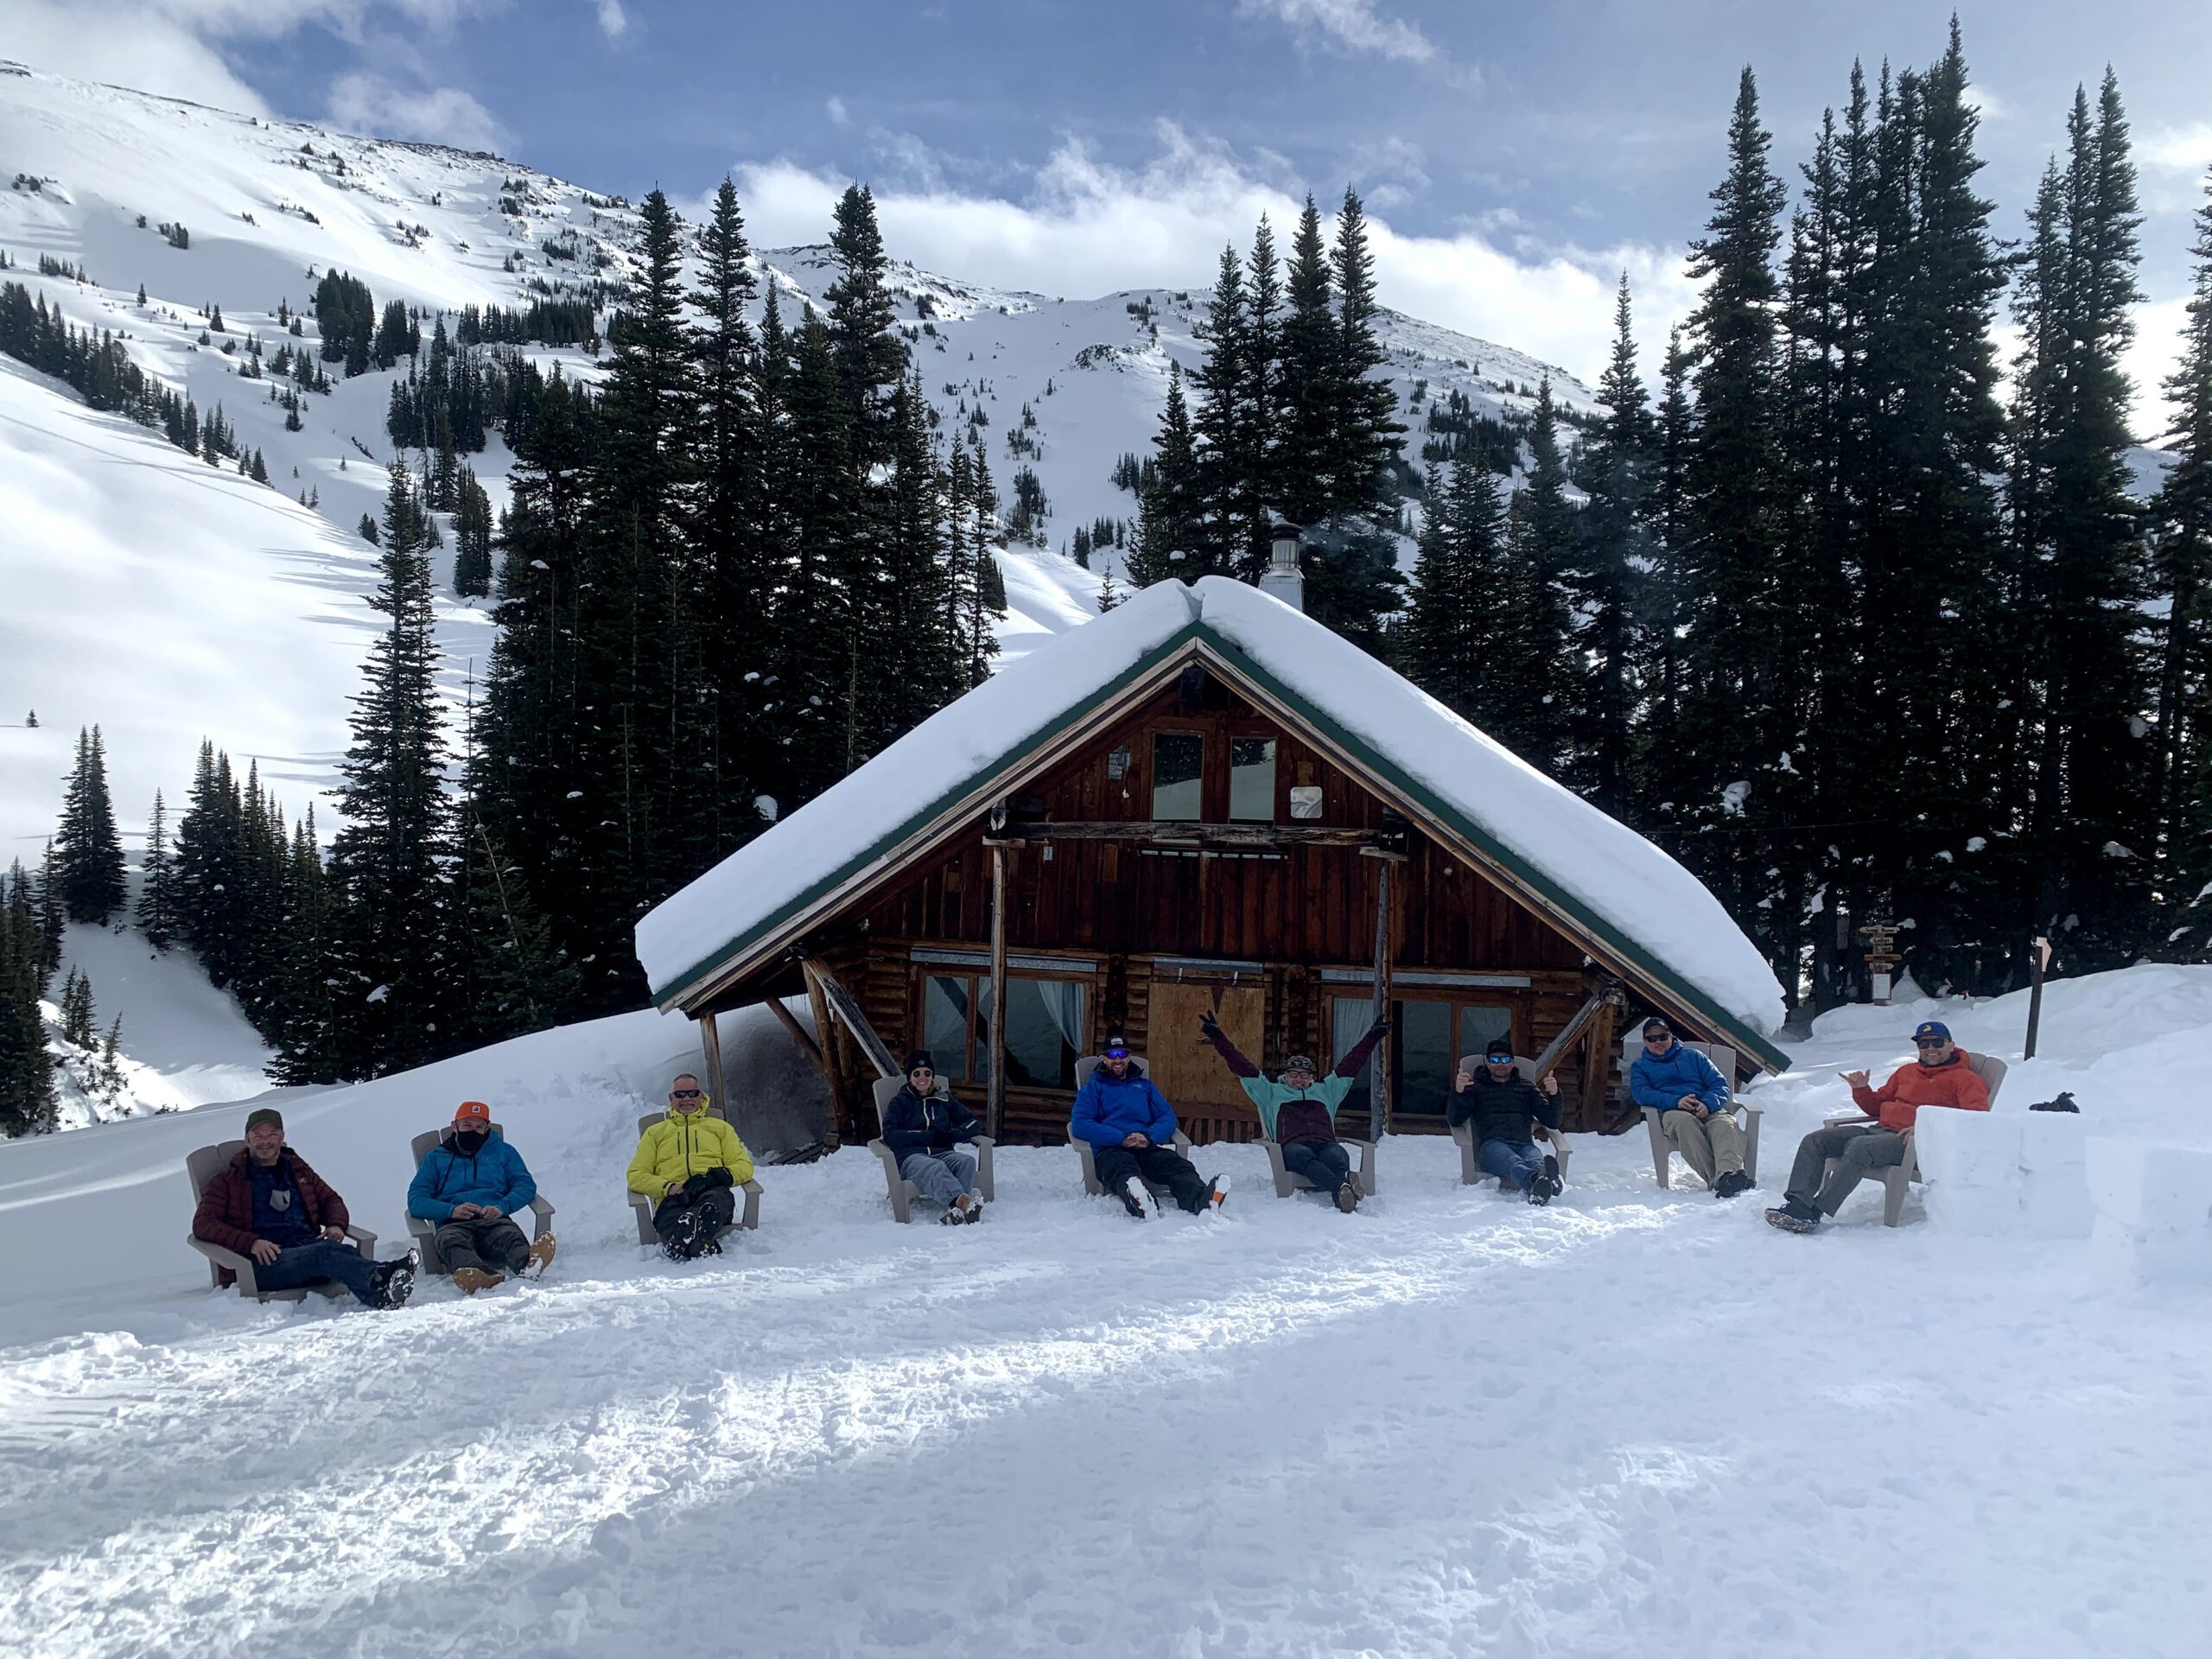 Mabey Ski Team & Guests sat outside wooden lodge in mountains of Whistler Canada